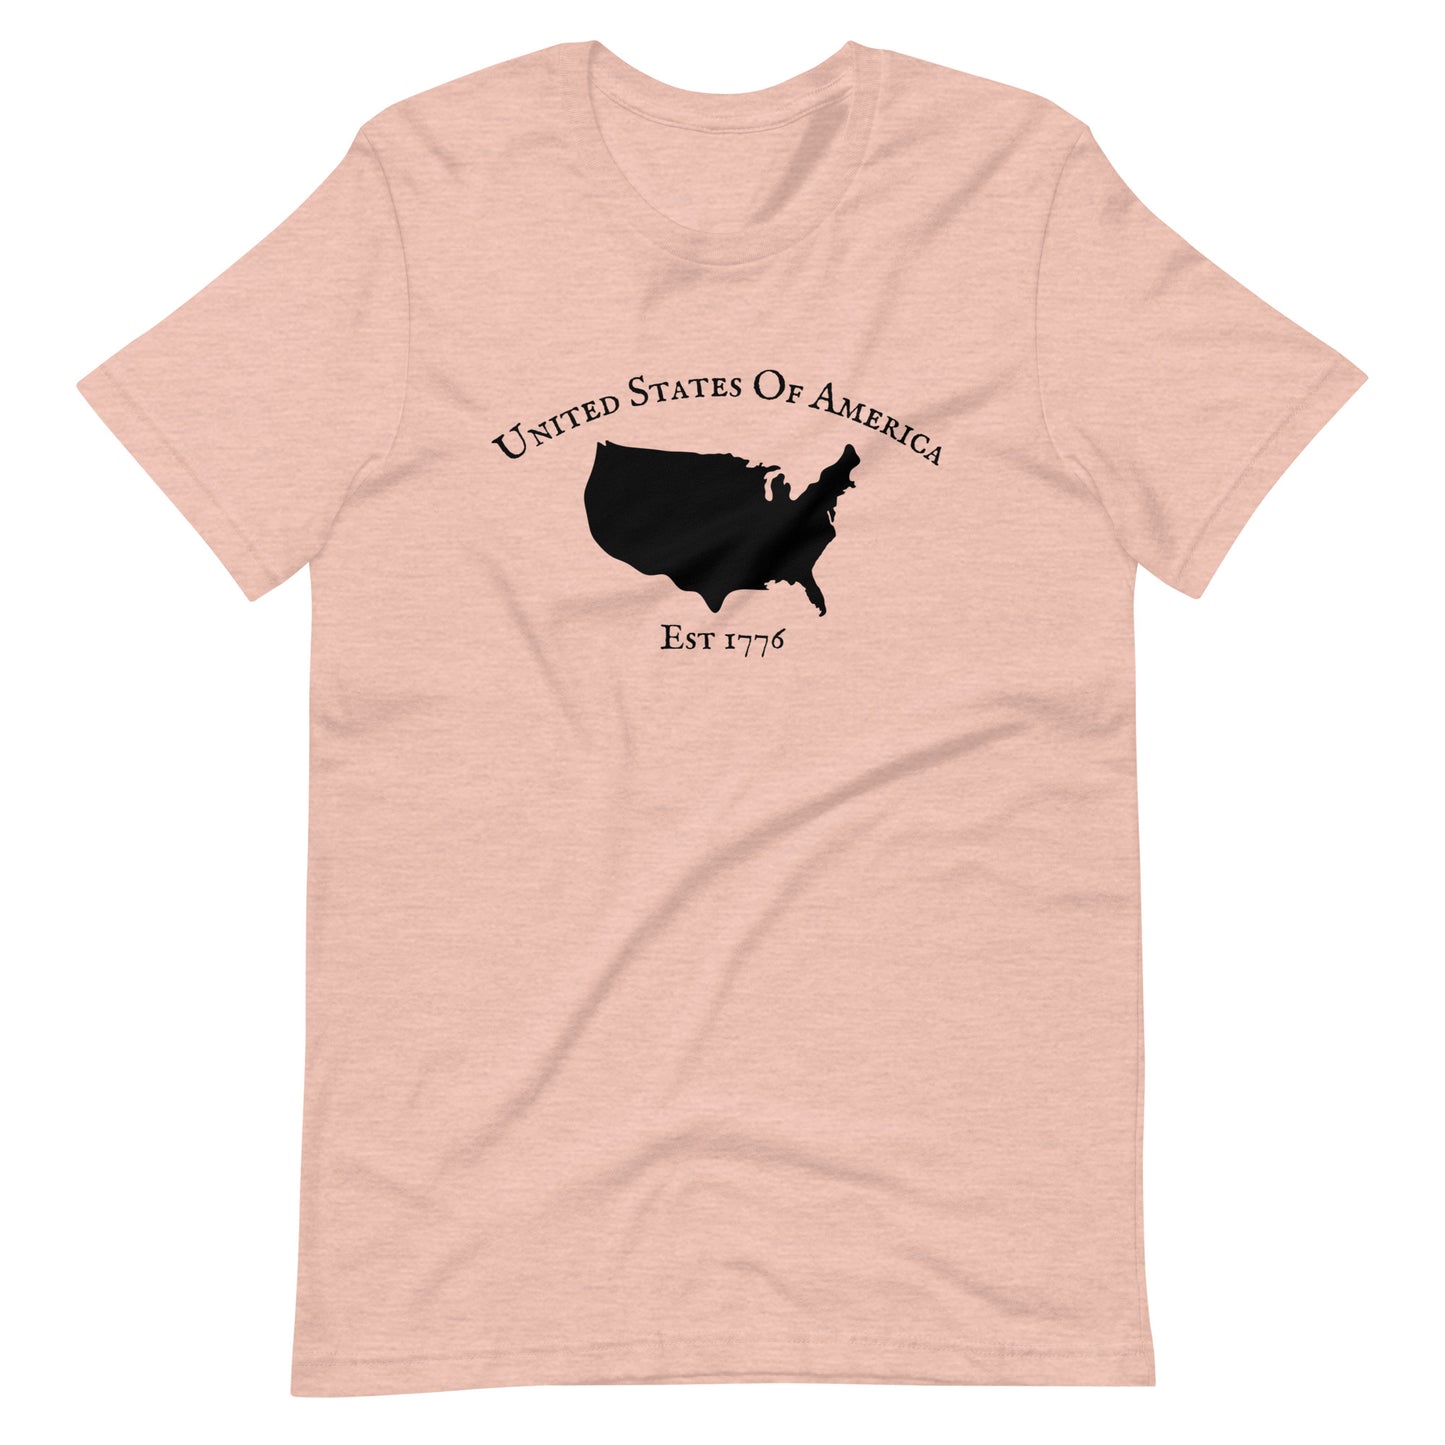 "United States Of America Est. 1776" T-Shirt - Weave Got Gifts - Unique Gifts You Won’t Find Anywhere Else!